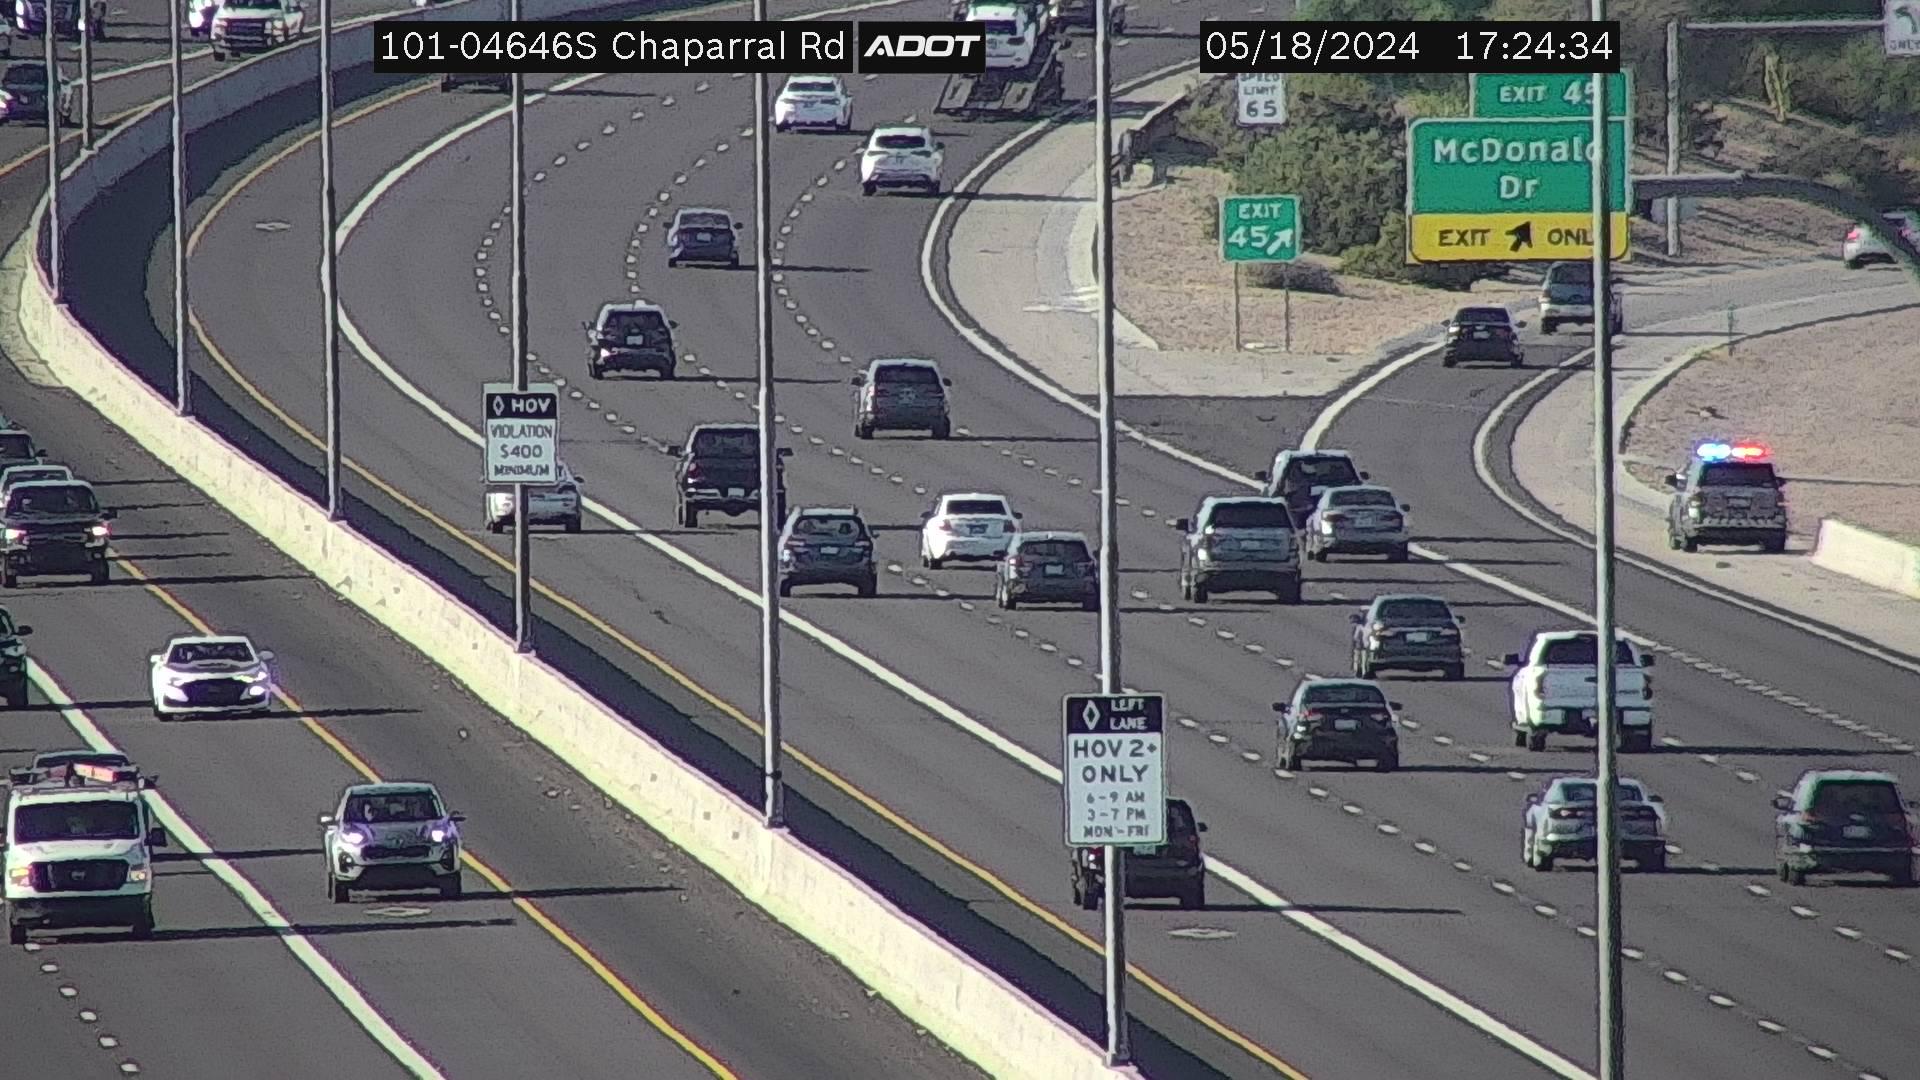 Traffic Cam Paradise Valley › South: L-101 SB 46.42 @Chaparral